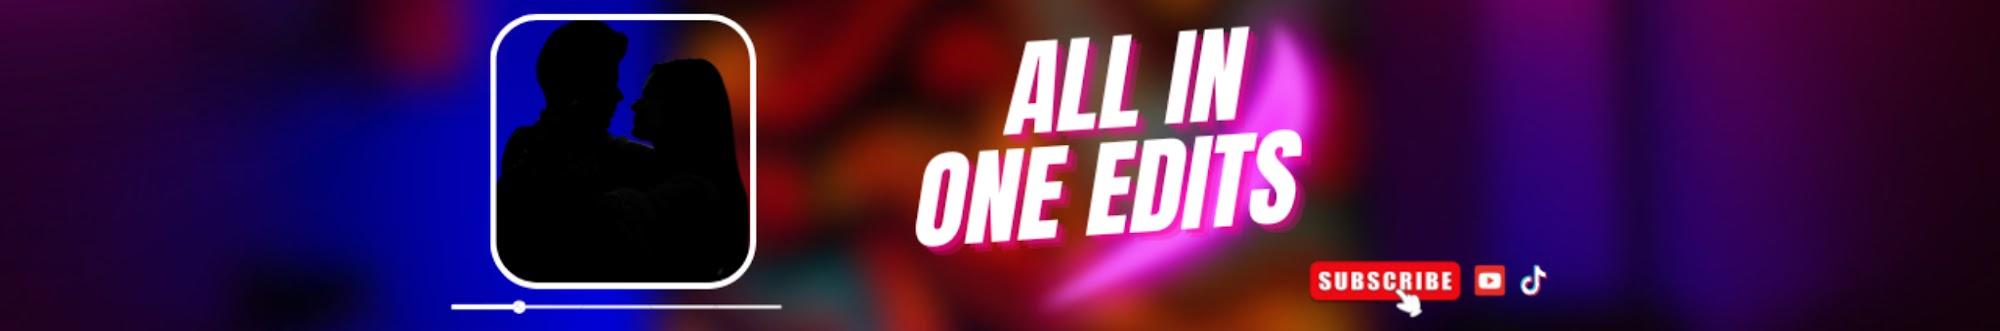 ALL IN ONE EDITS